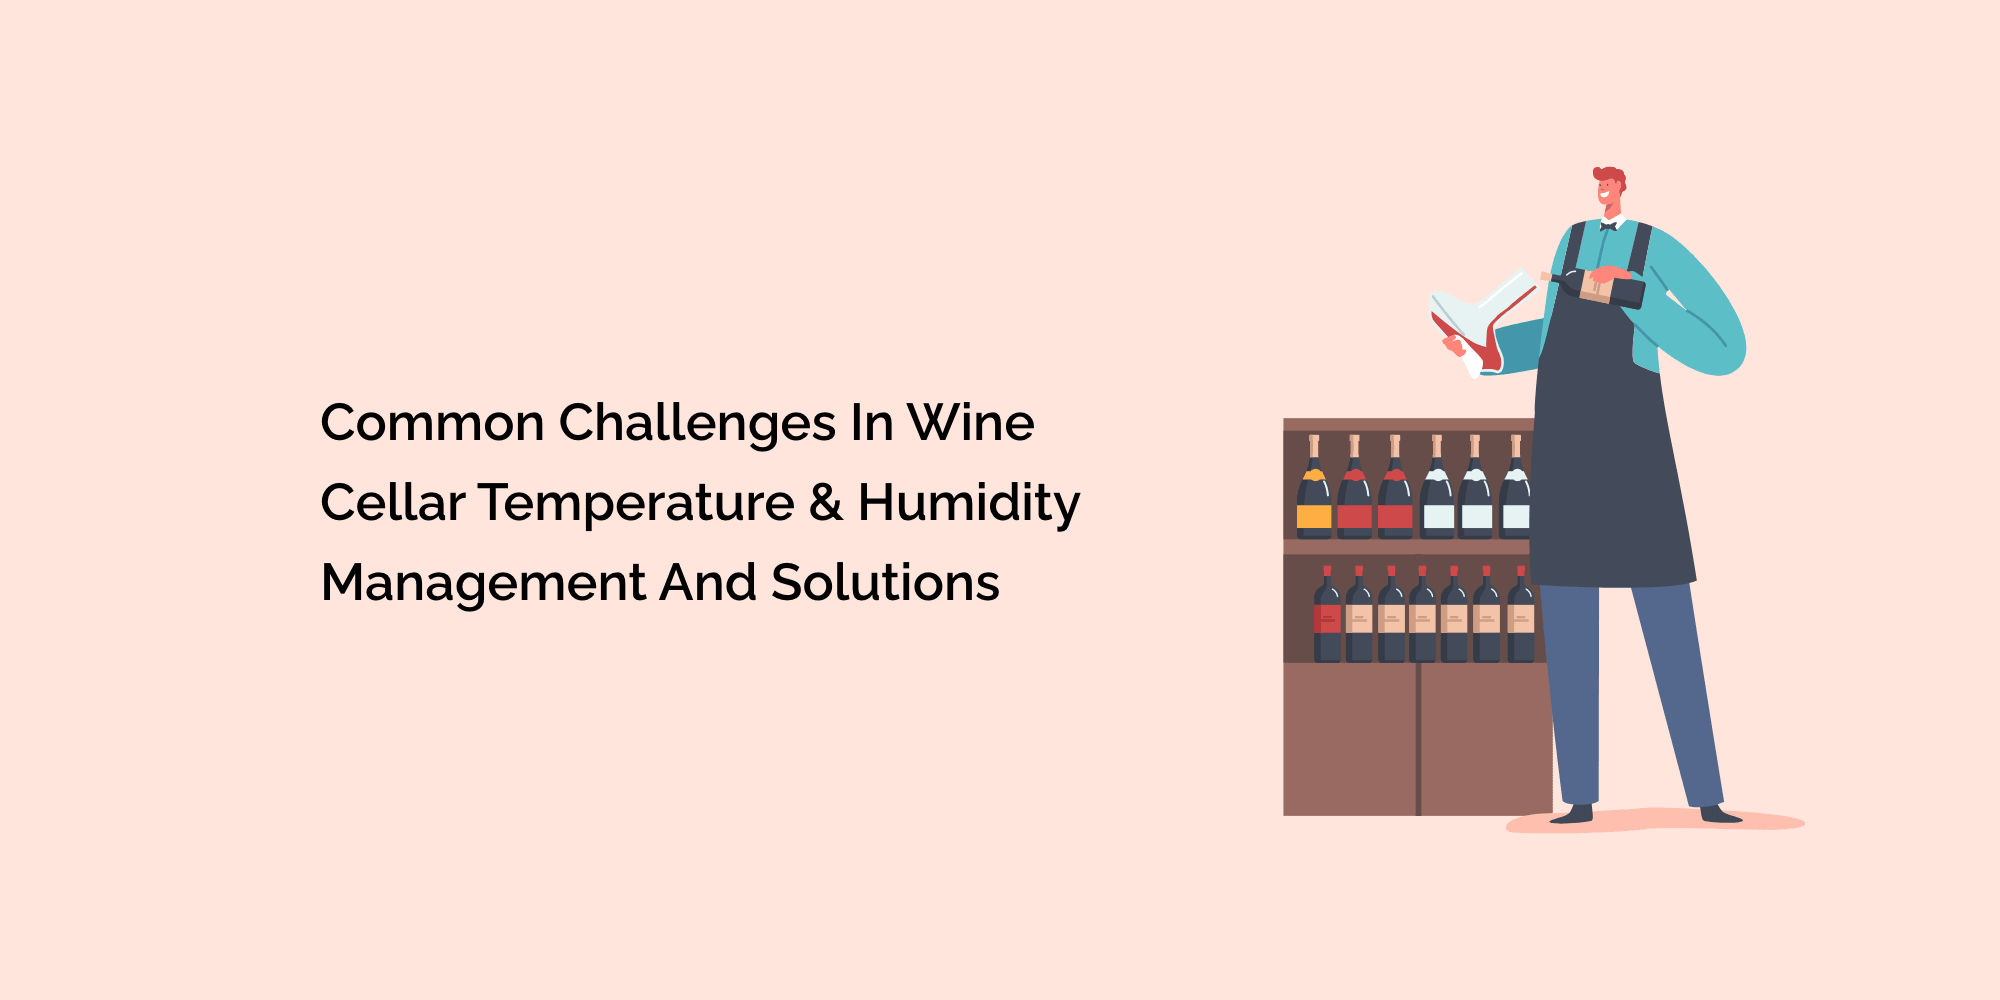 Common Challenges in Wine Cellar Temperature & Humidity Management and Solutions